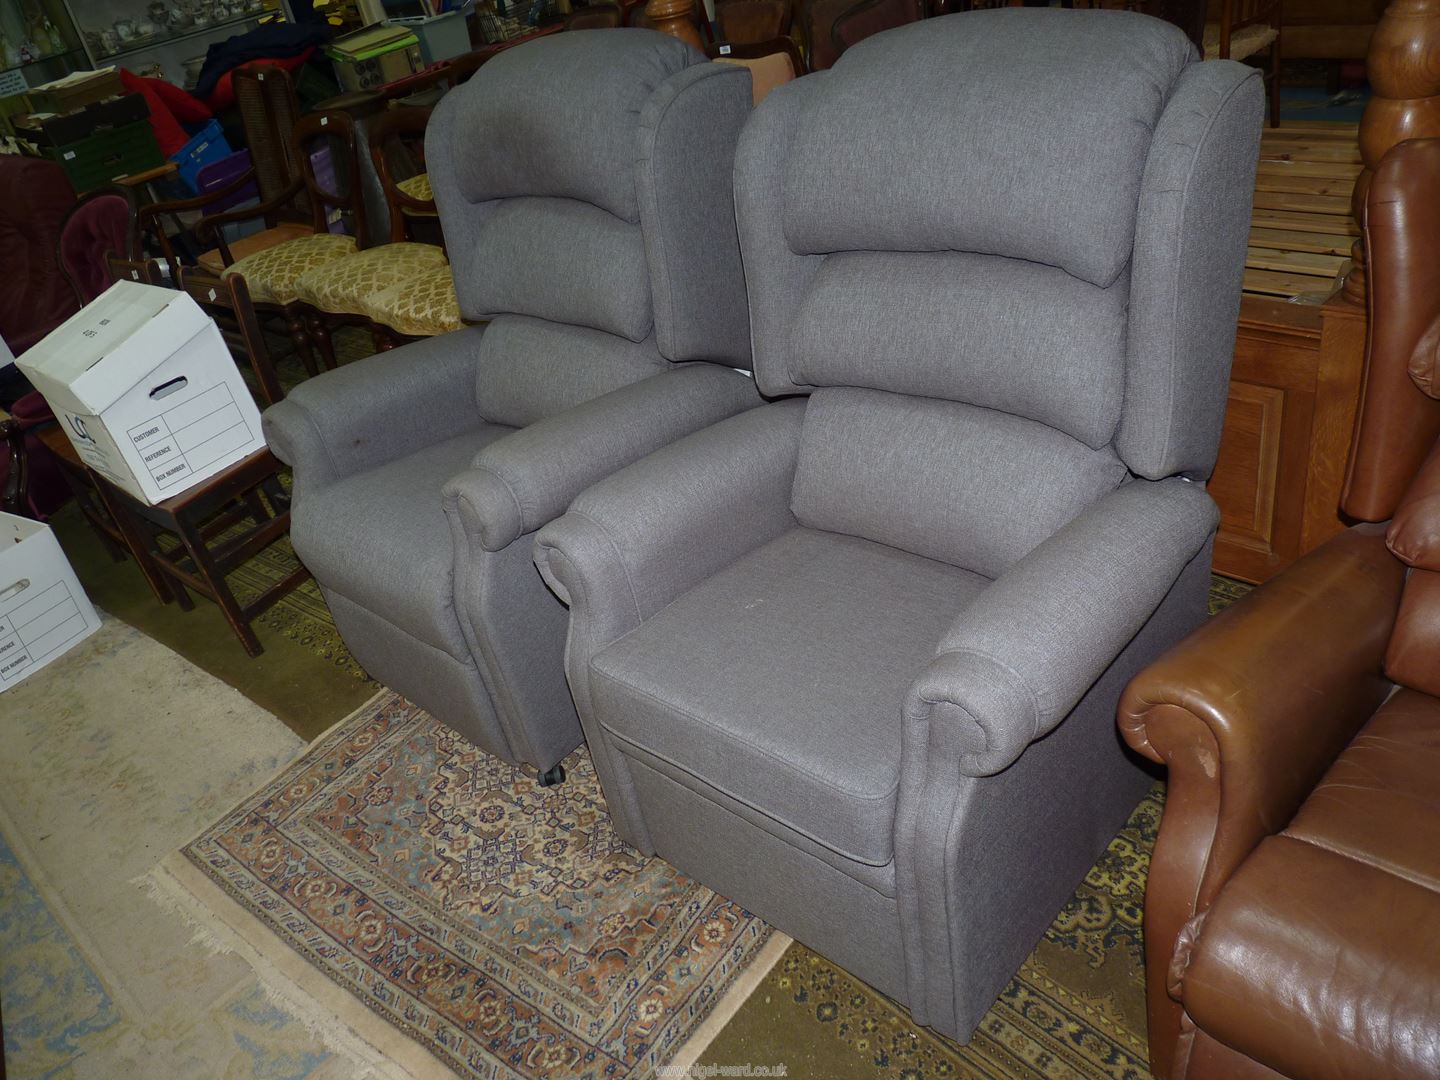 A pair of British made Armchairs upholstered in grey-blue weave type fabric,